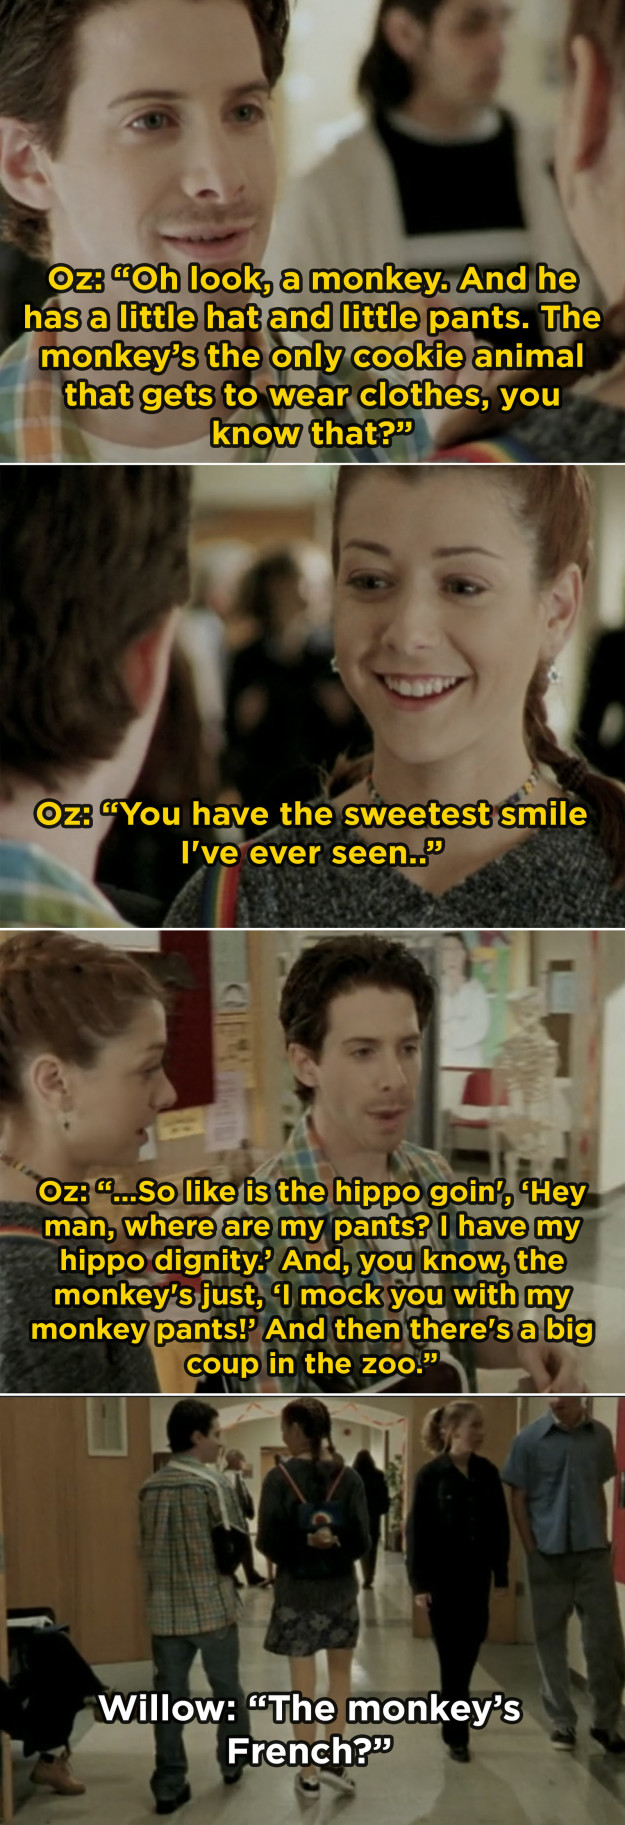 In Buffy the Vampire Slayer, Seth Green and Alyson Hannigan improvised the memorable scene in which Oz and Willow joke about animal crackers.